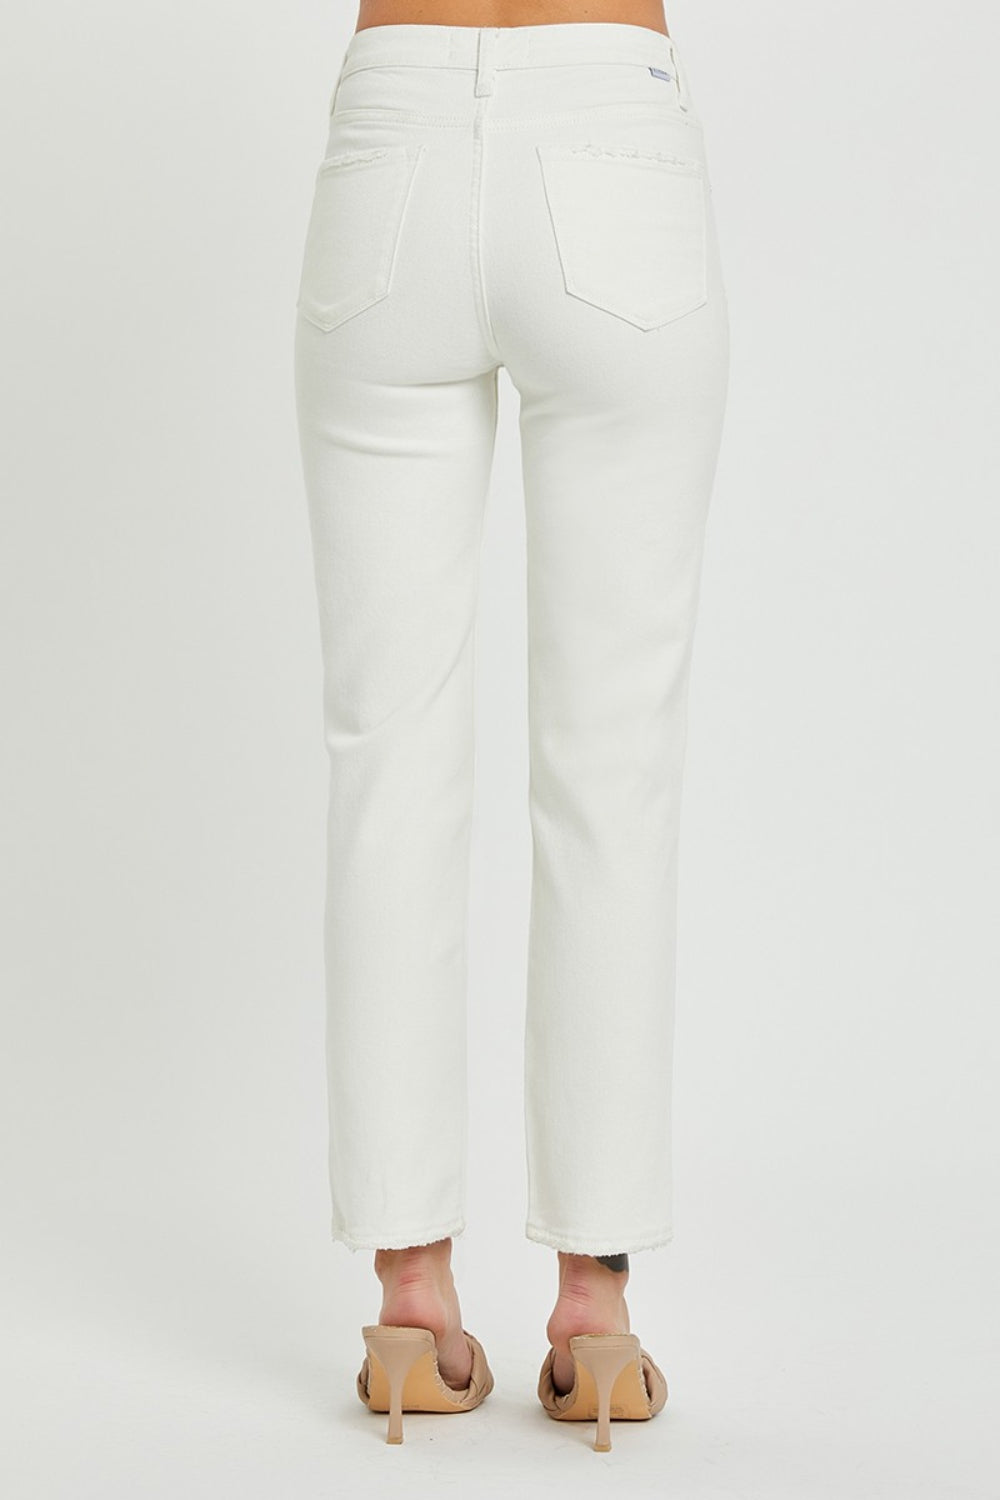 RISEN Mid-Rise Tummy Control Straight Jeans in White Southern Soul Collectives